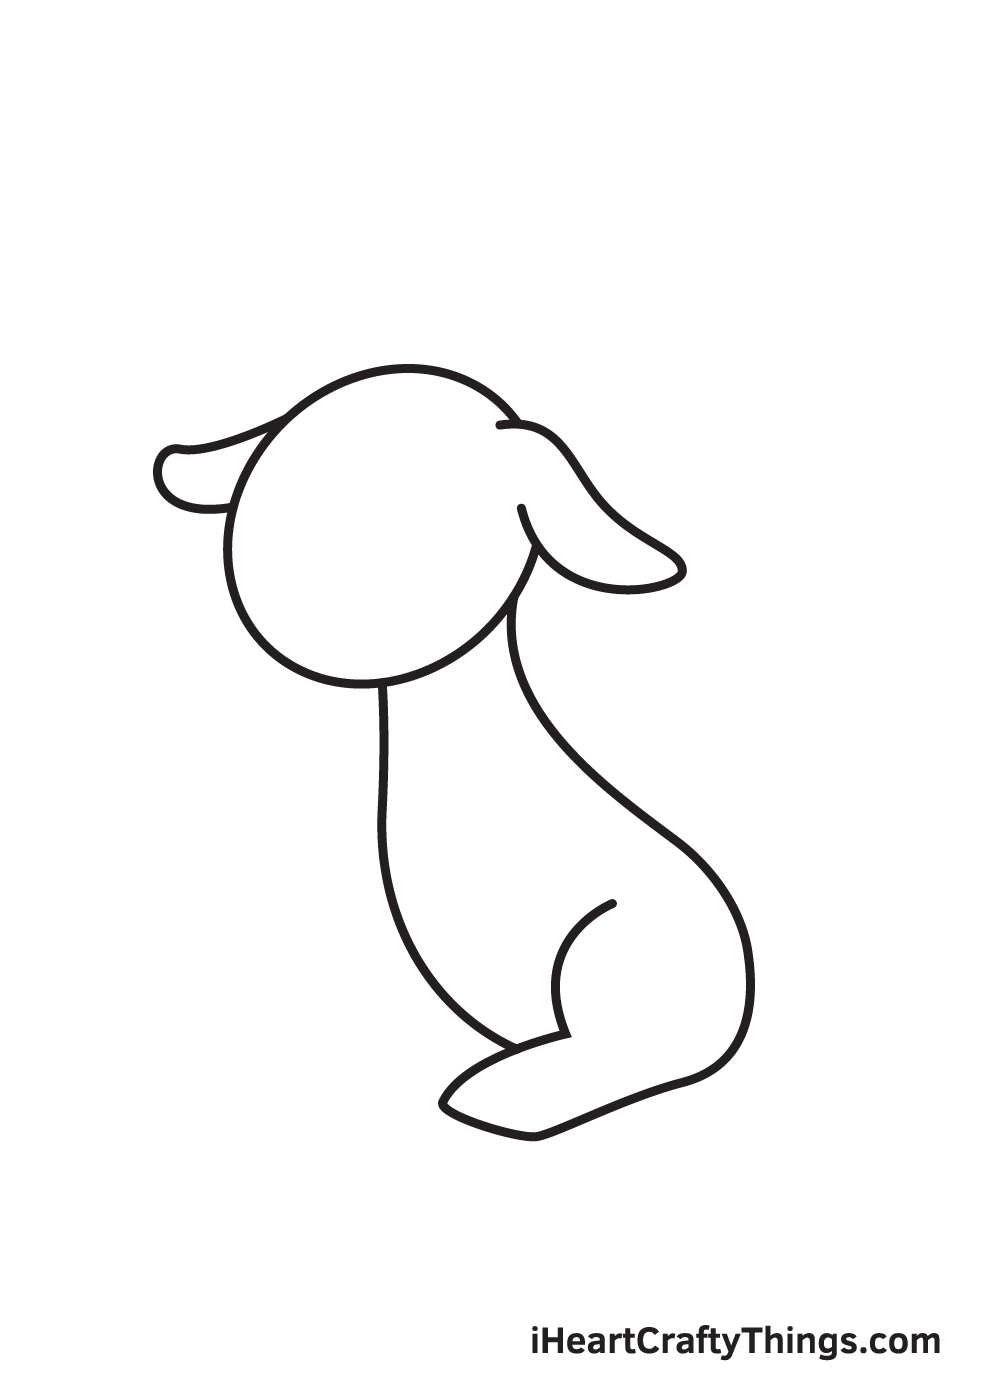 goat drawing - step 4